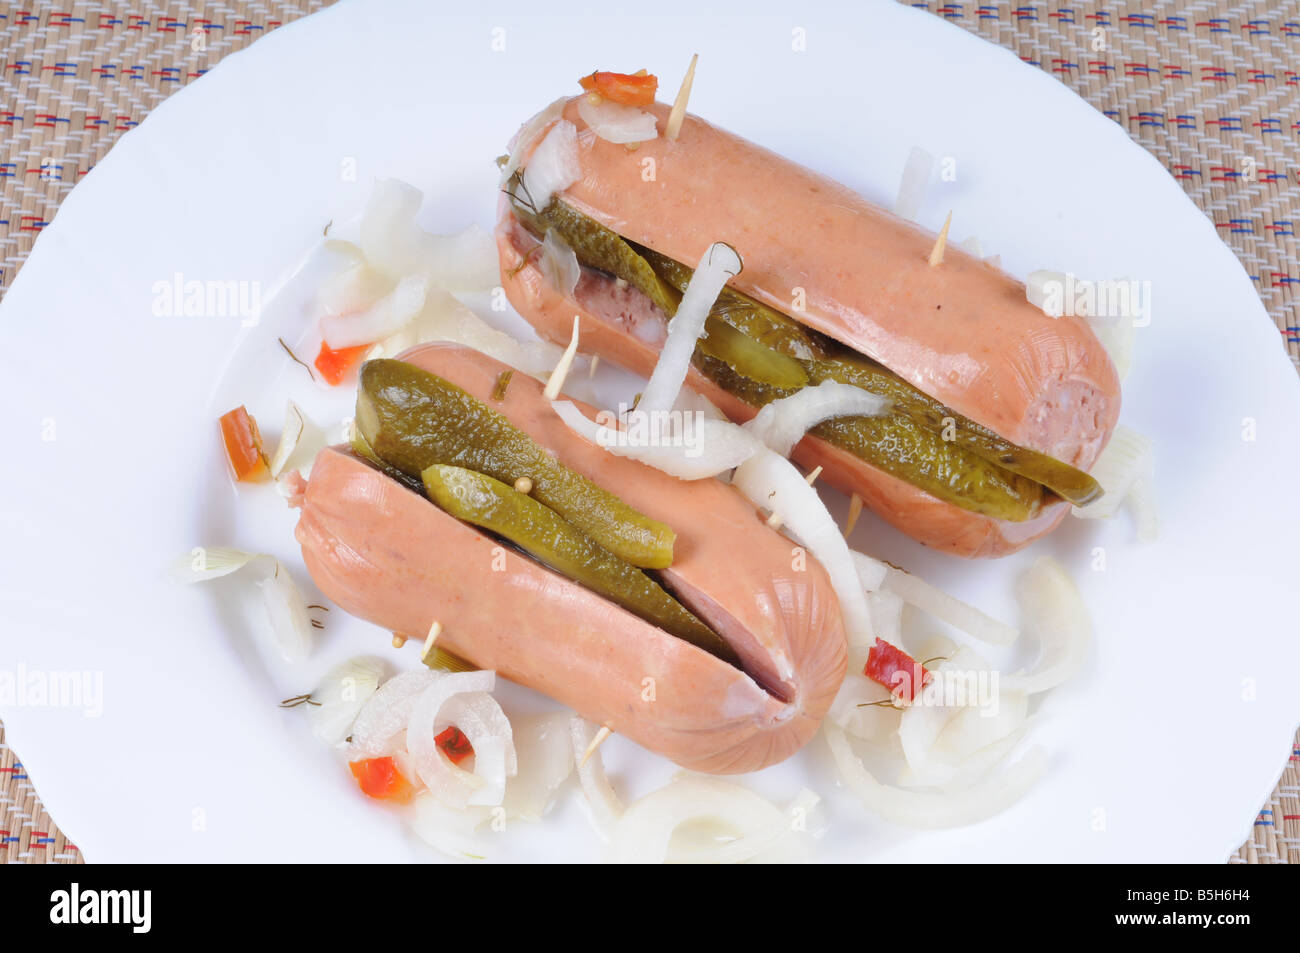 Pickled sausages with sliced onion and cucumber on white plate.Traditional Czech food. Stock Photo